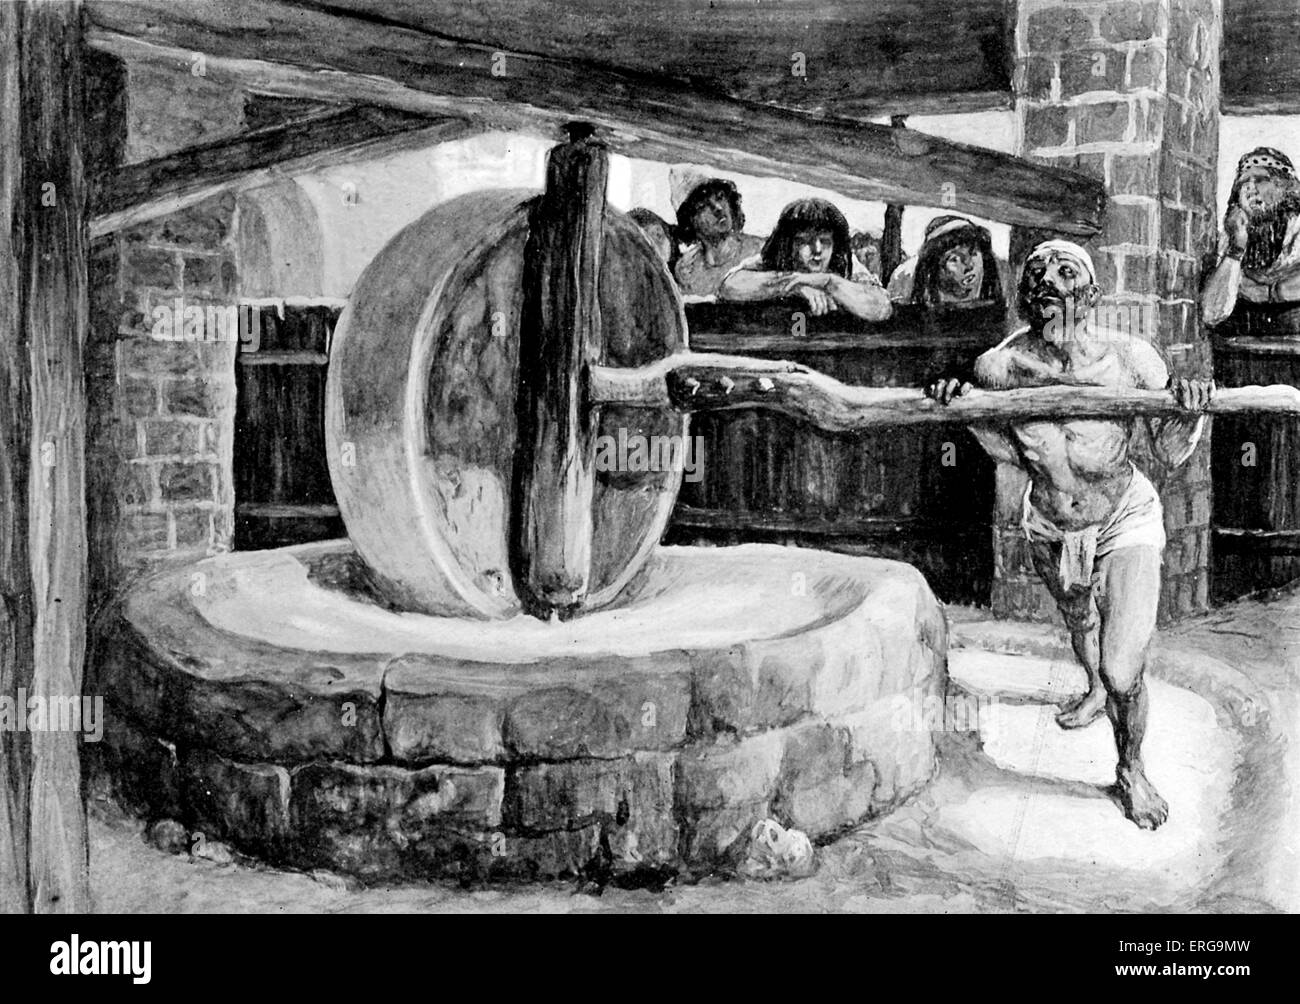 'Samson turns the mill in prison' by J James Tissot. Illustration to Book of Judges, 16.21: 'But the Philistines took him, and Stock Photo